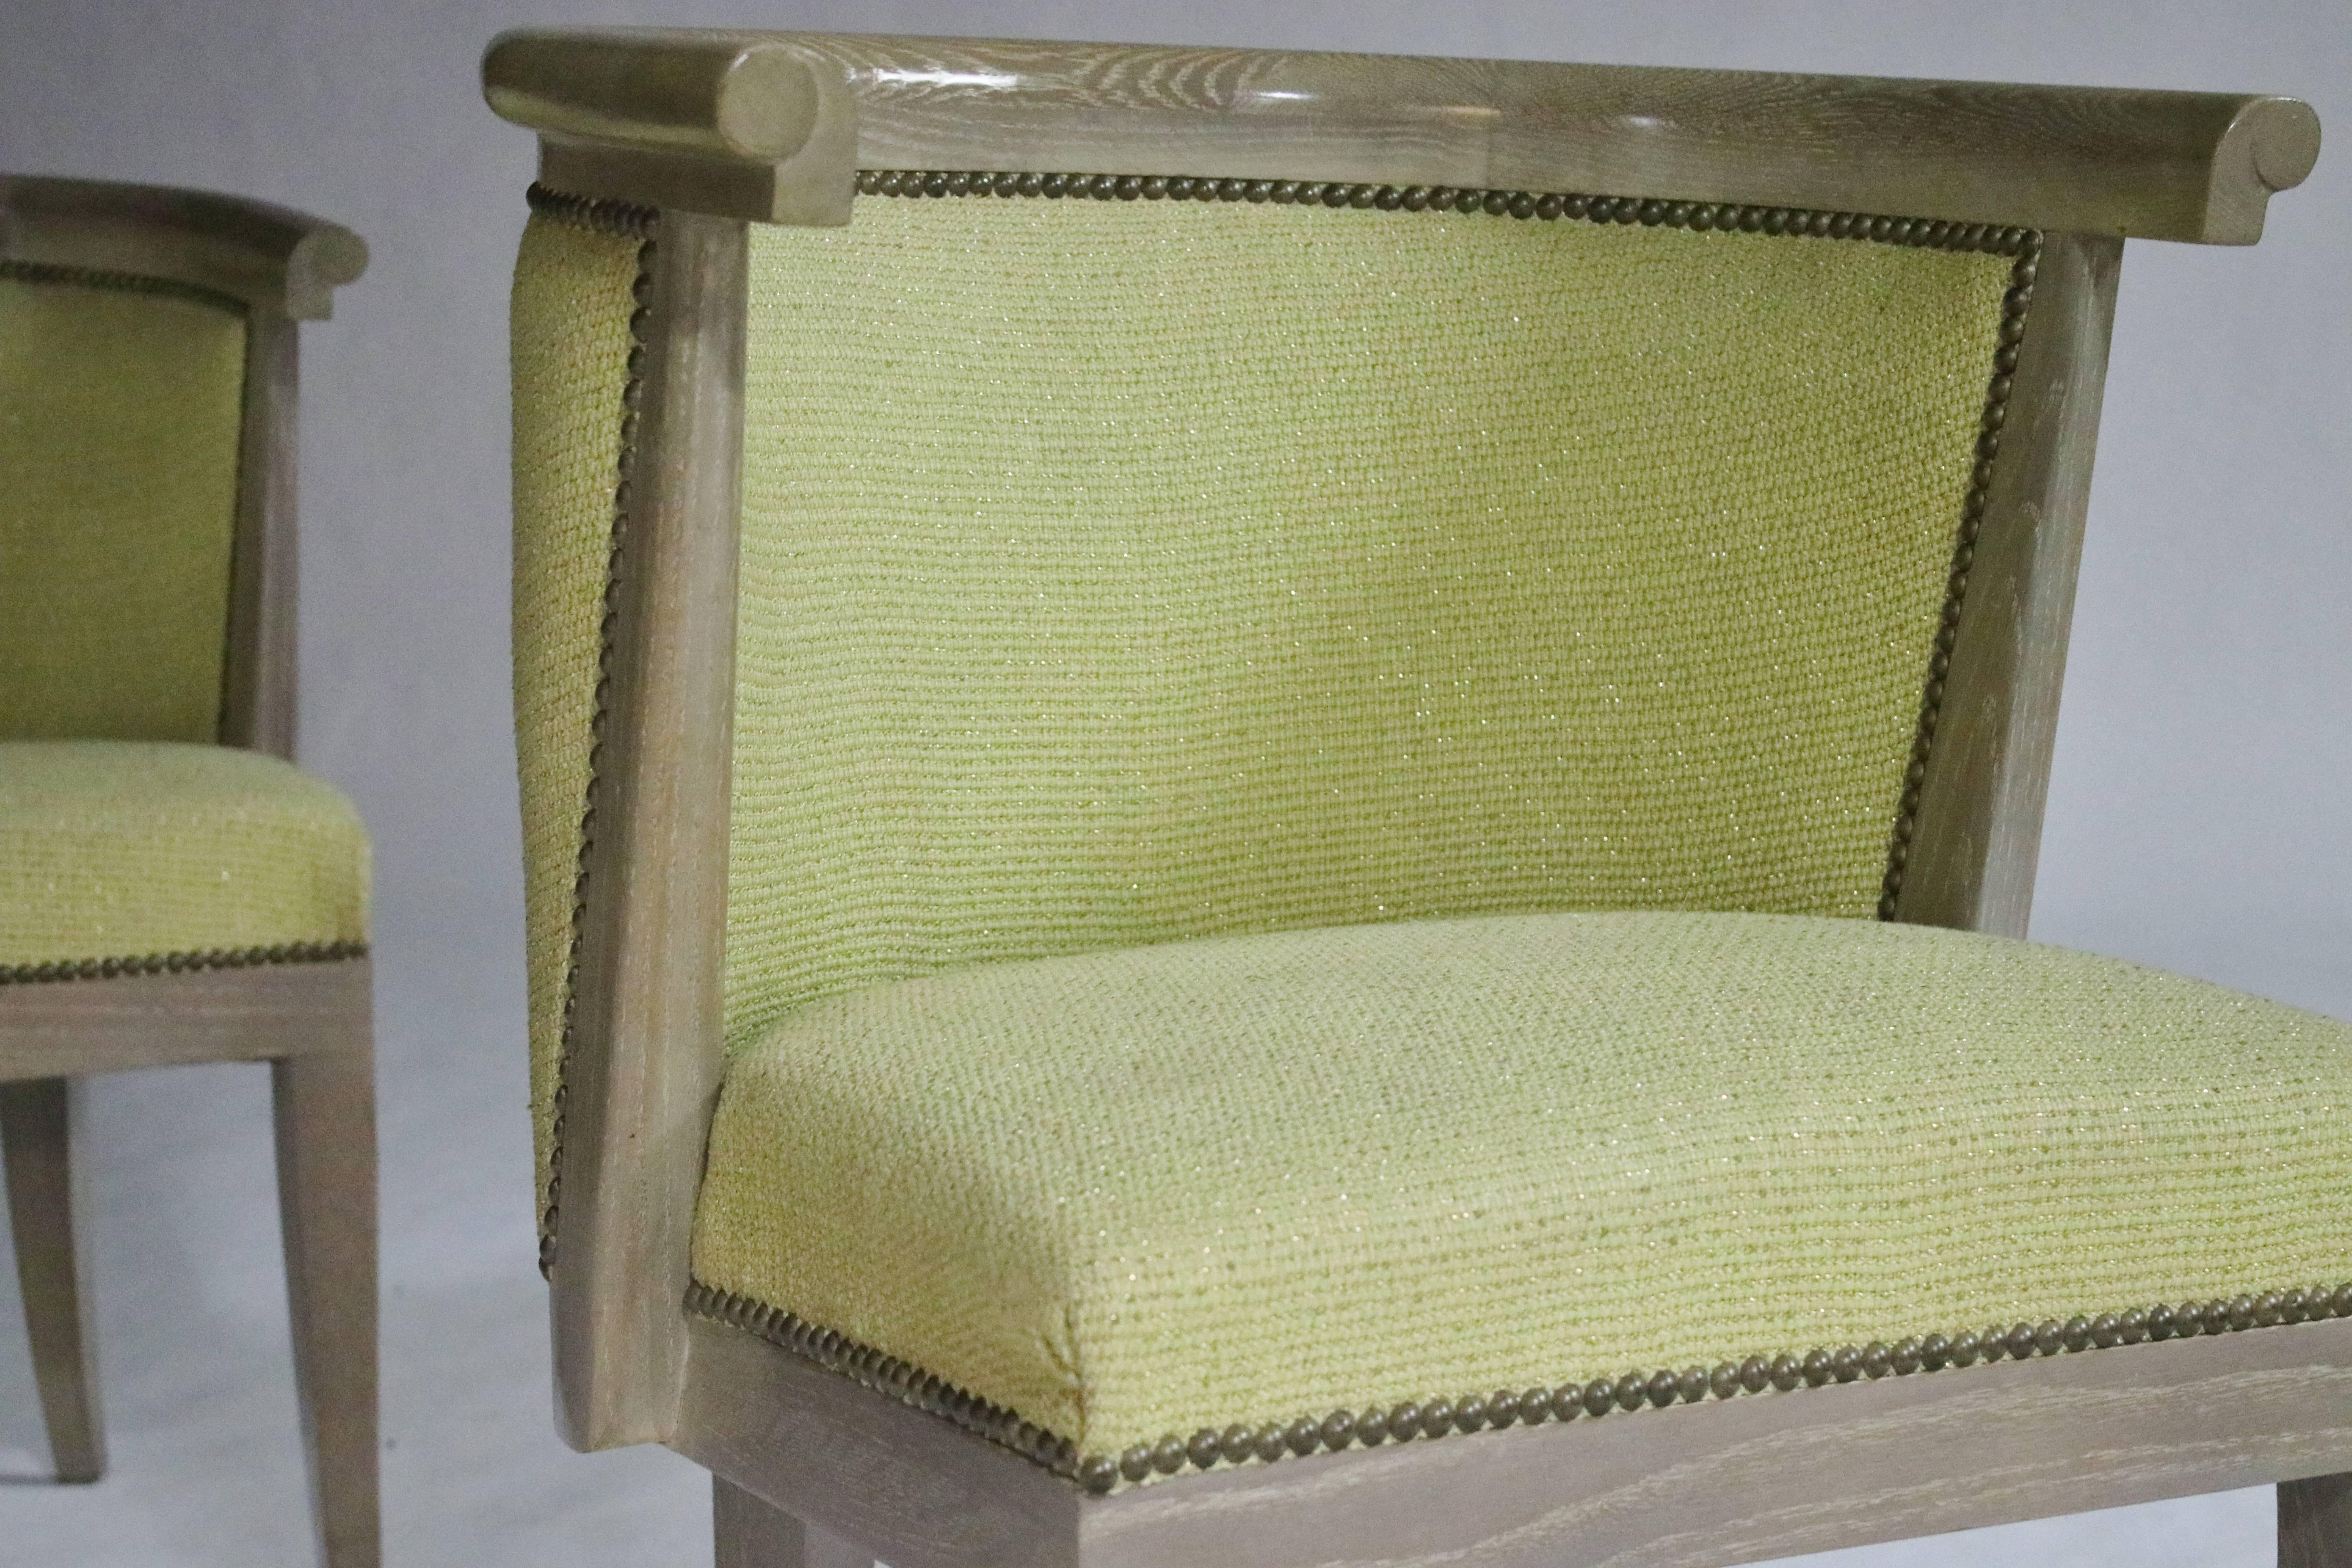 Rom Weber originals in modern by Harold Schwartz M-744 oak dining chairs with the original chartreuse green fabric with gold threading and nail heads. Set of six all in excellent original condition. Measures: Seat height 18